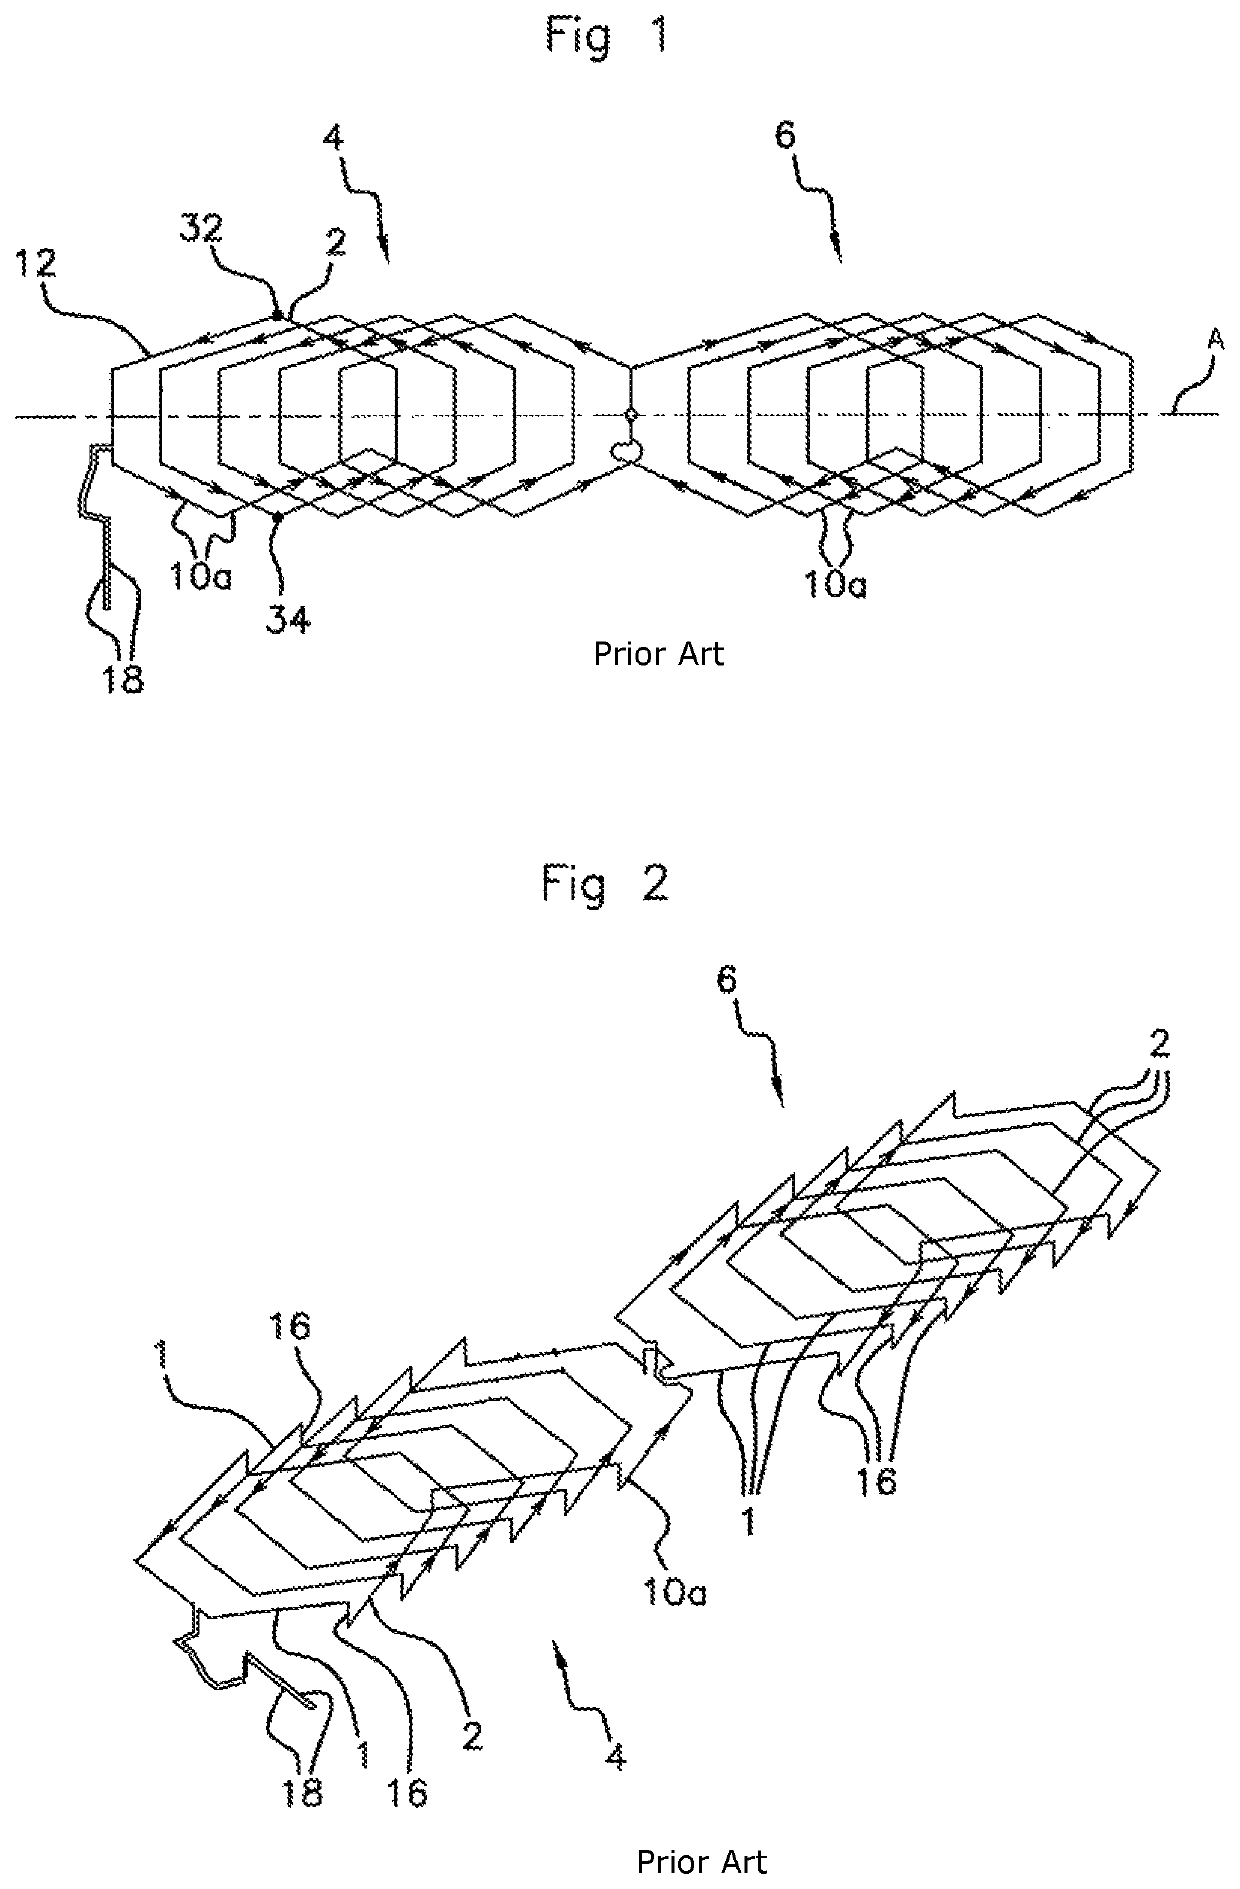 Inductive position sensor with secondary turns extending through a printed circuit board